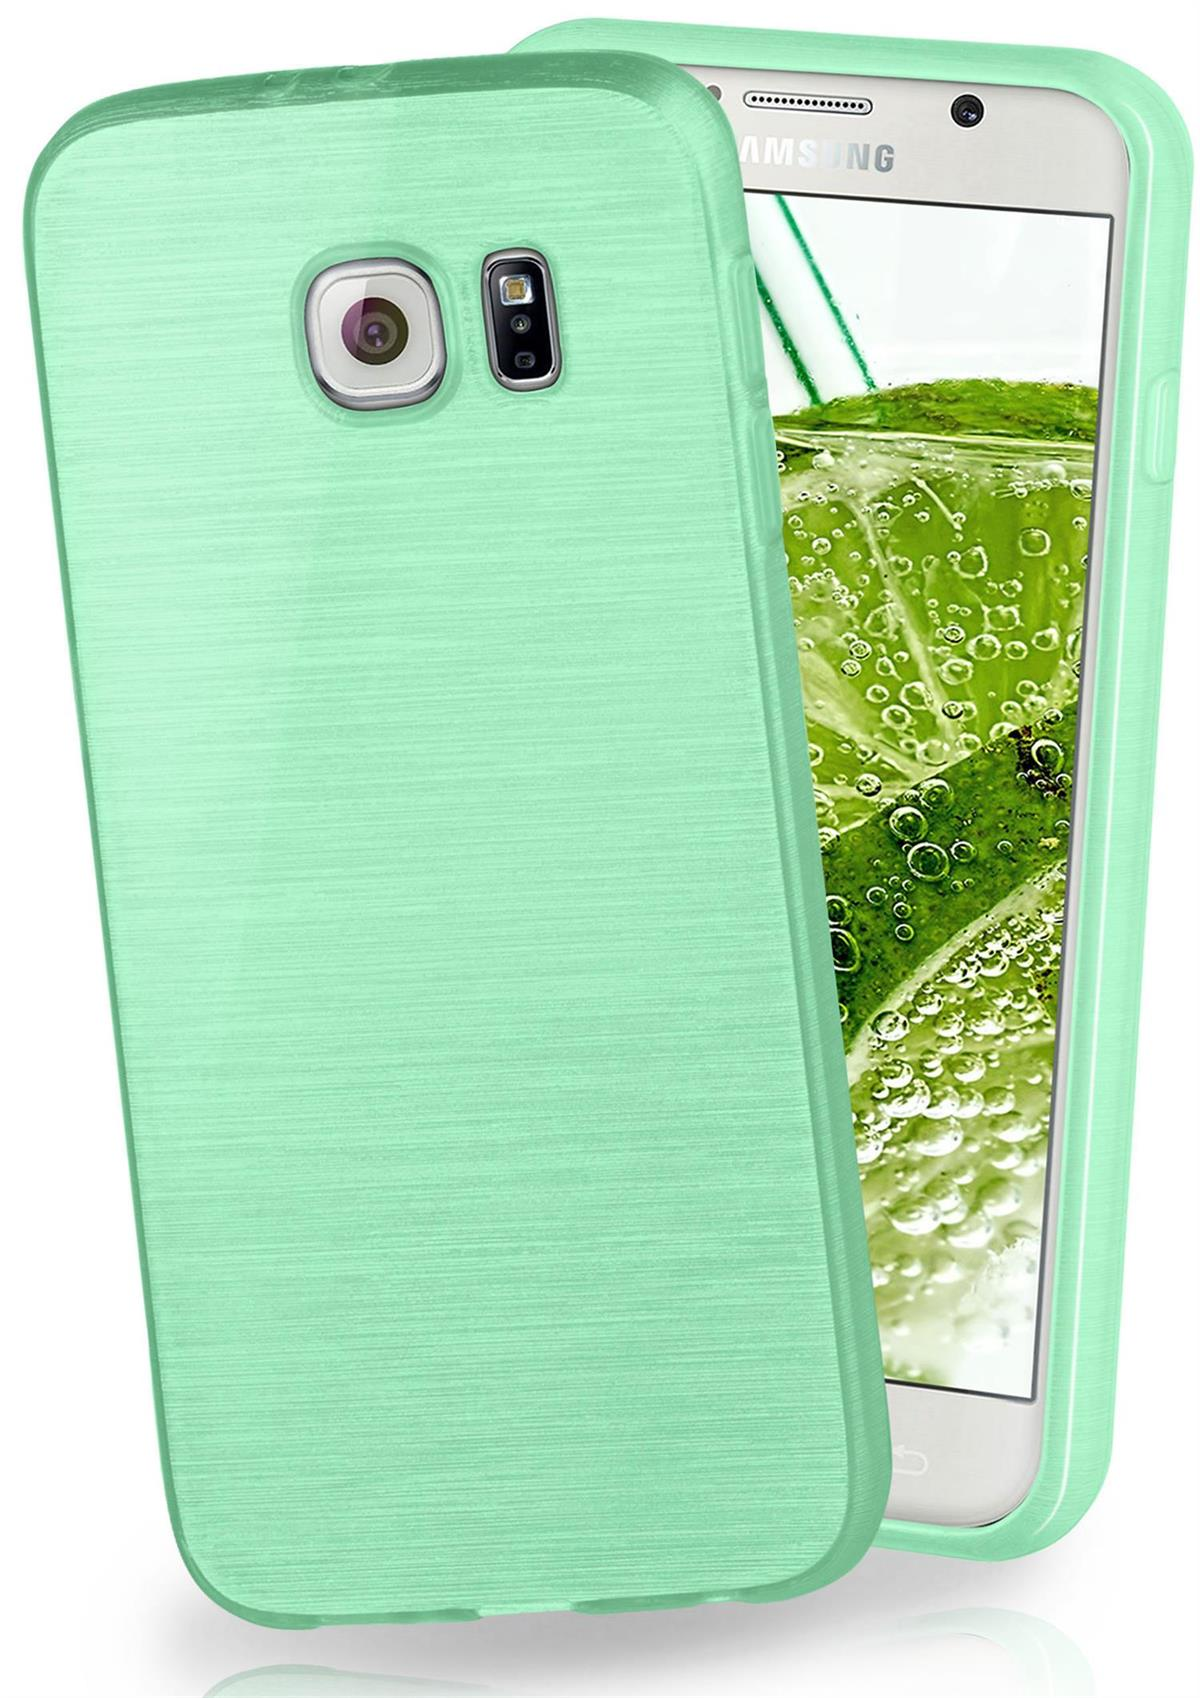 Backcover, Brushed S6, Galaxy Case, Samsung, Mint-Green MOEX